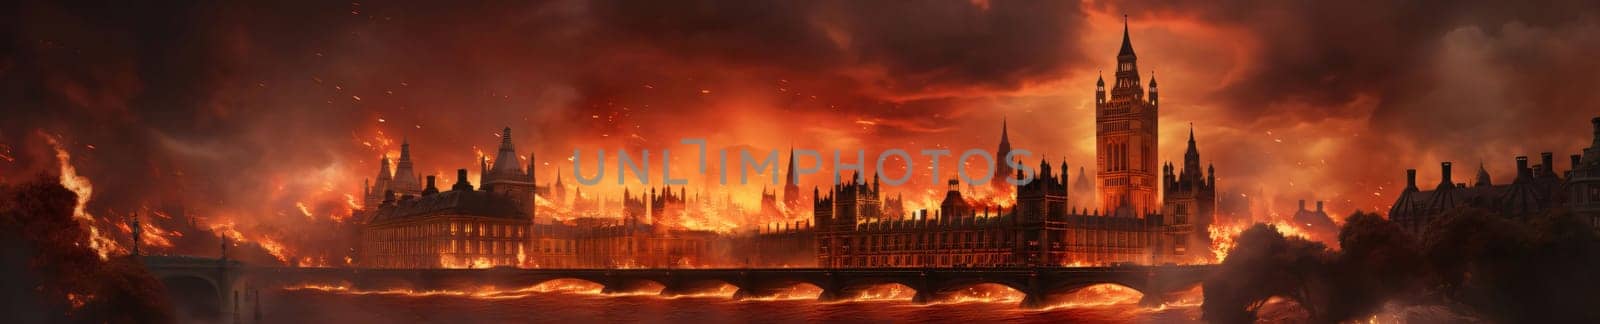 Banner: Panoramic view of the Big Ben and the Houses of Parliament during a fire.